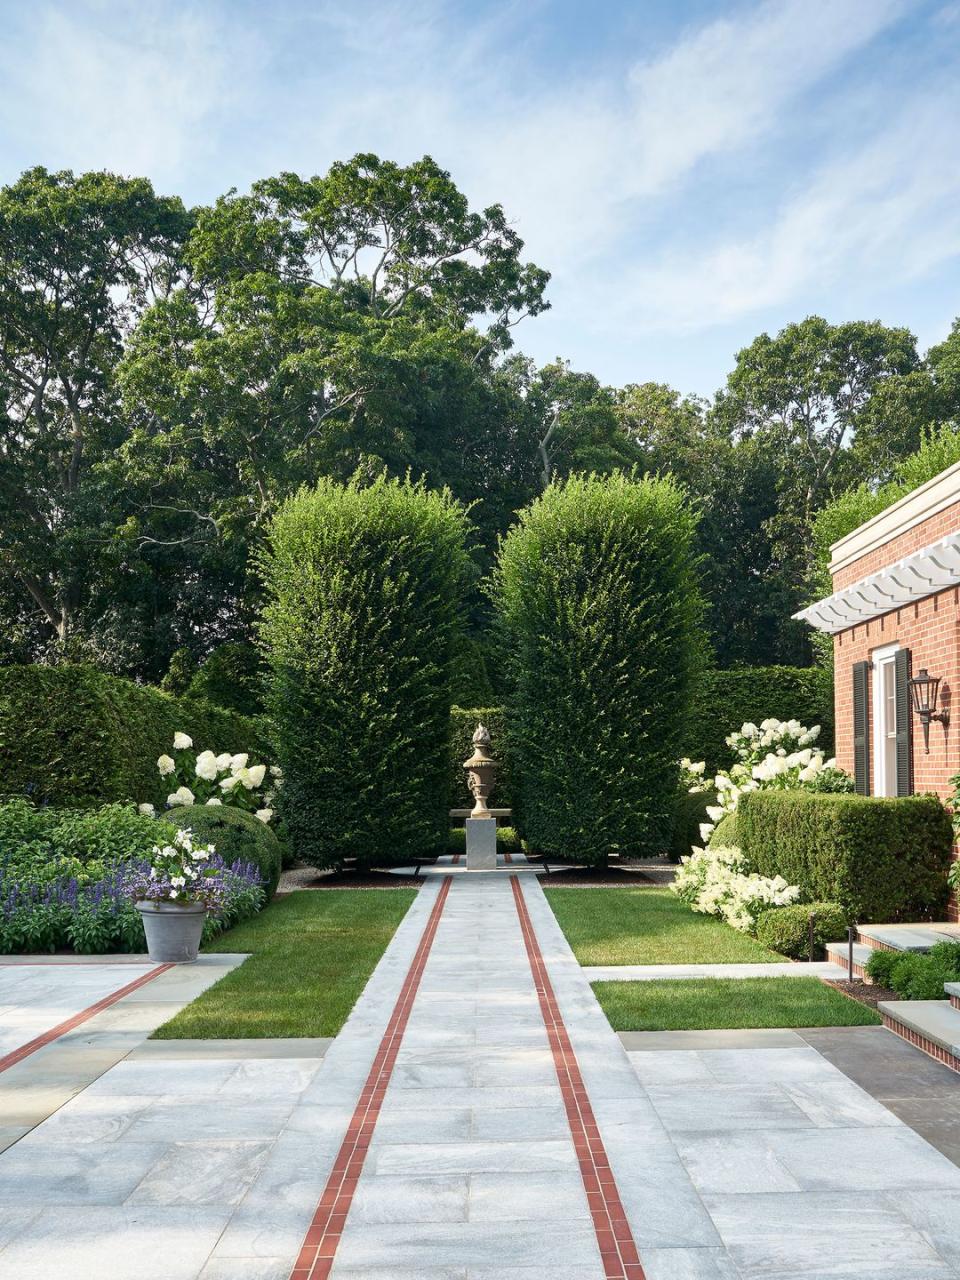 classic long paved walkway to a pedestal topped with an urn between two large pine trees